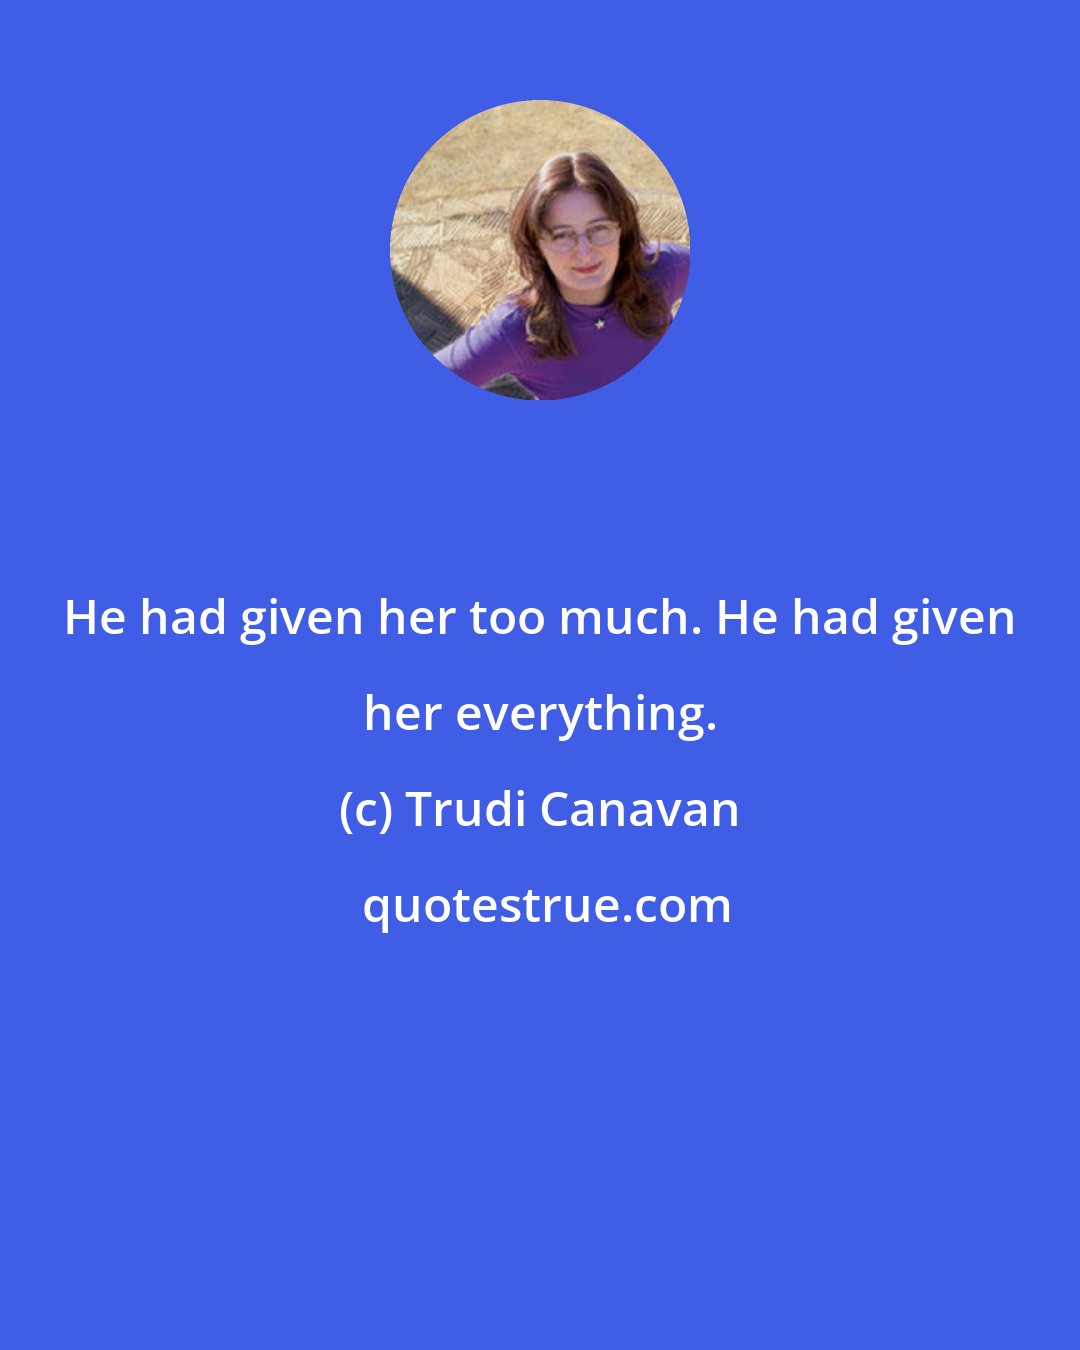 Trudi Canavan: He had given her too much. He had given her everything.